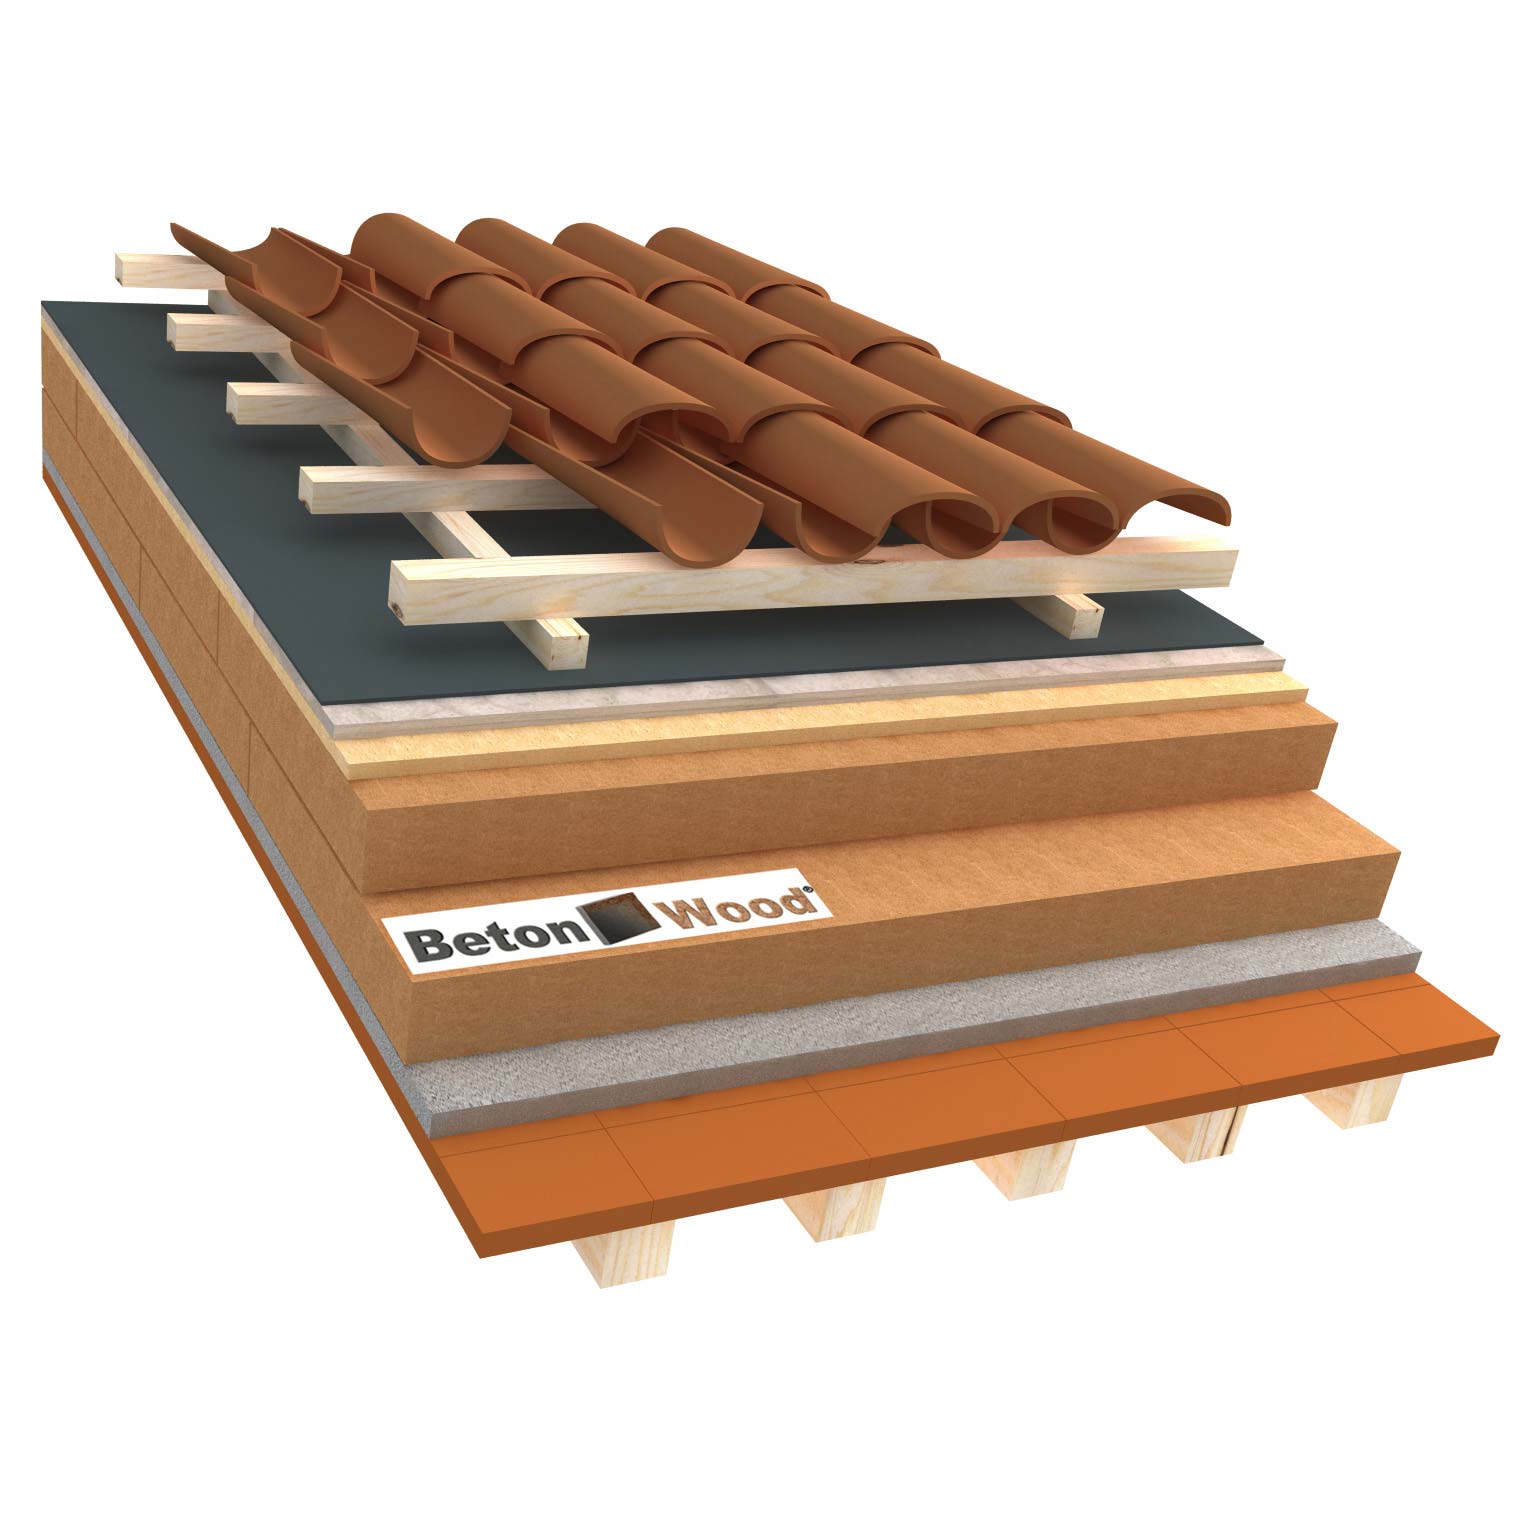 Ventilated roof with fiber wood Isorel, Universal and cement bonded particle boards on terracotta tiles